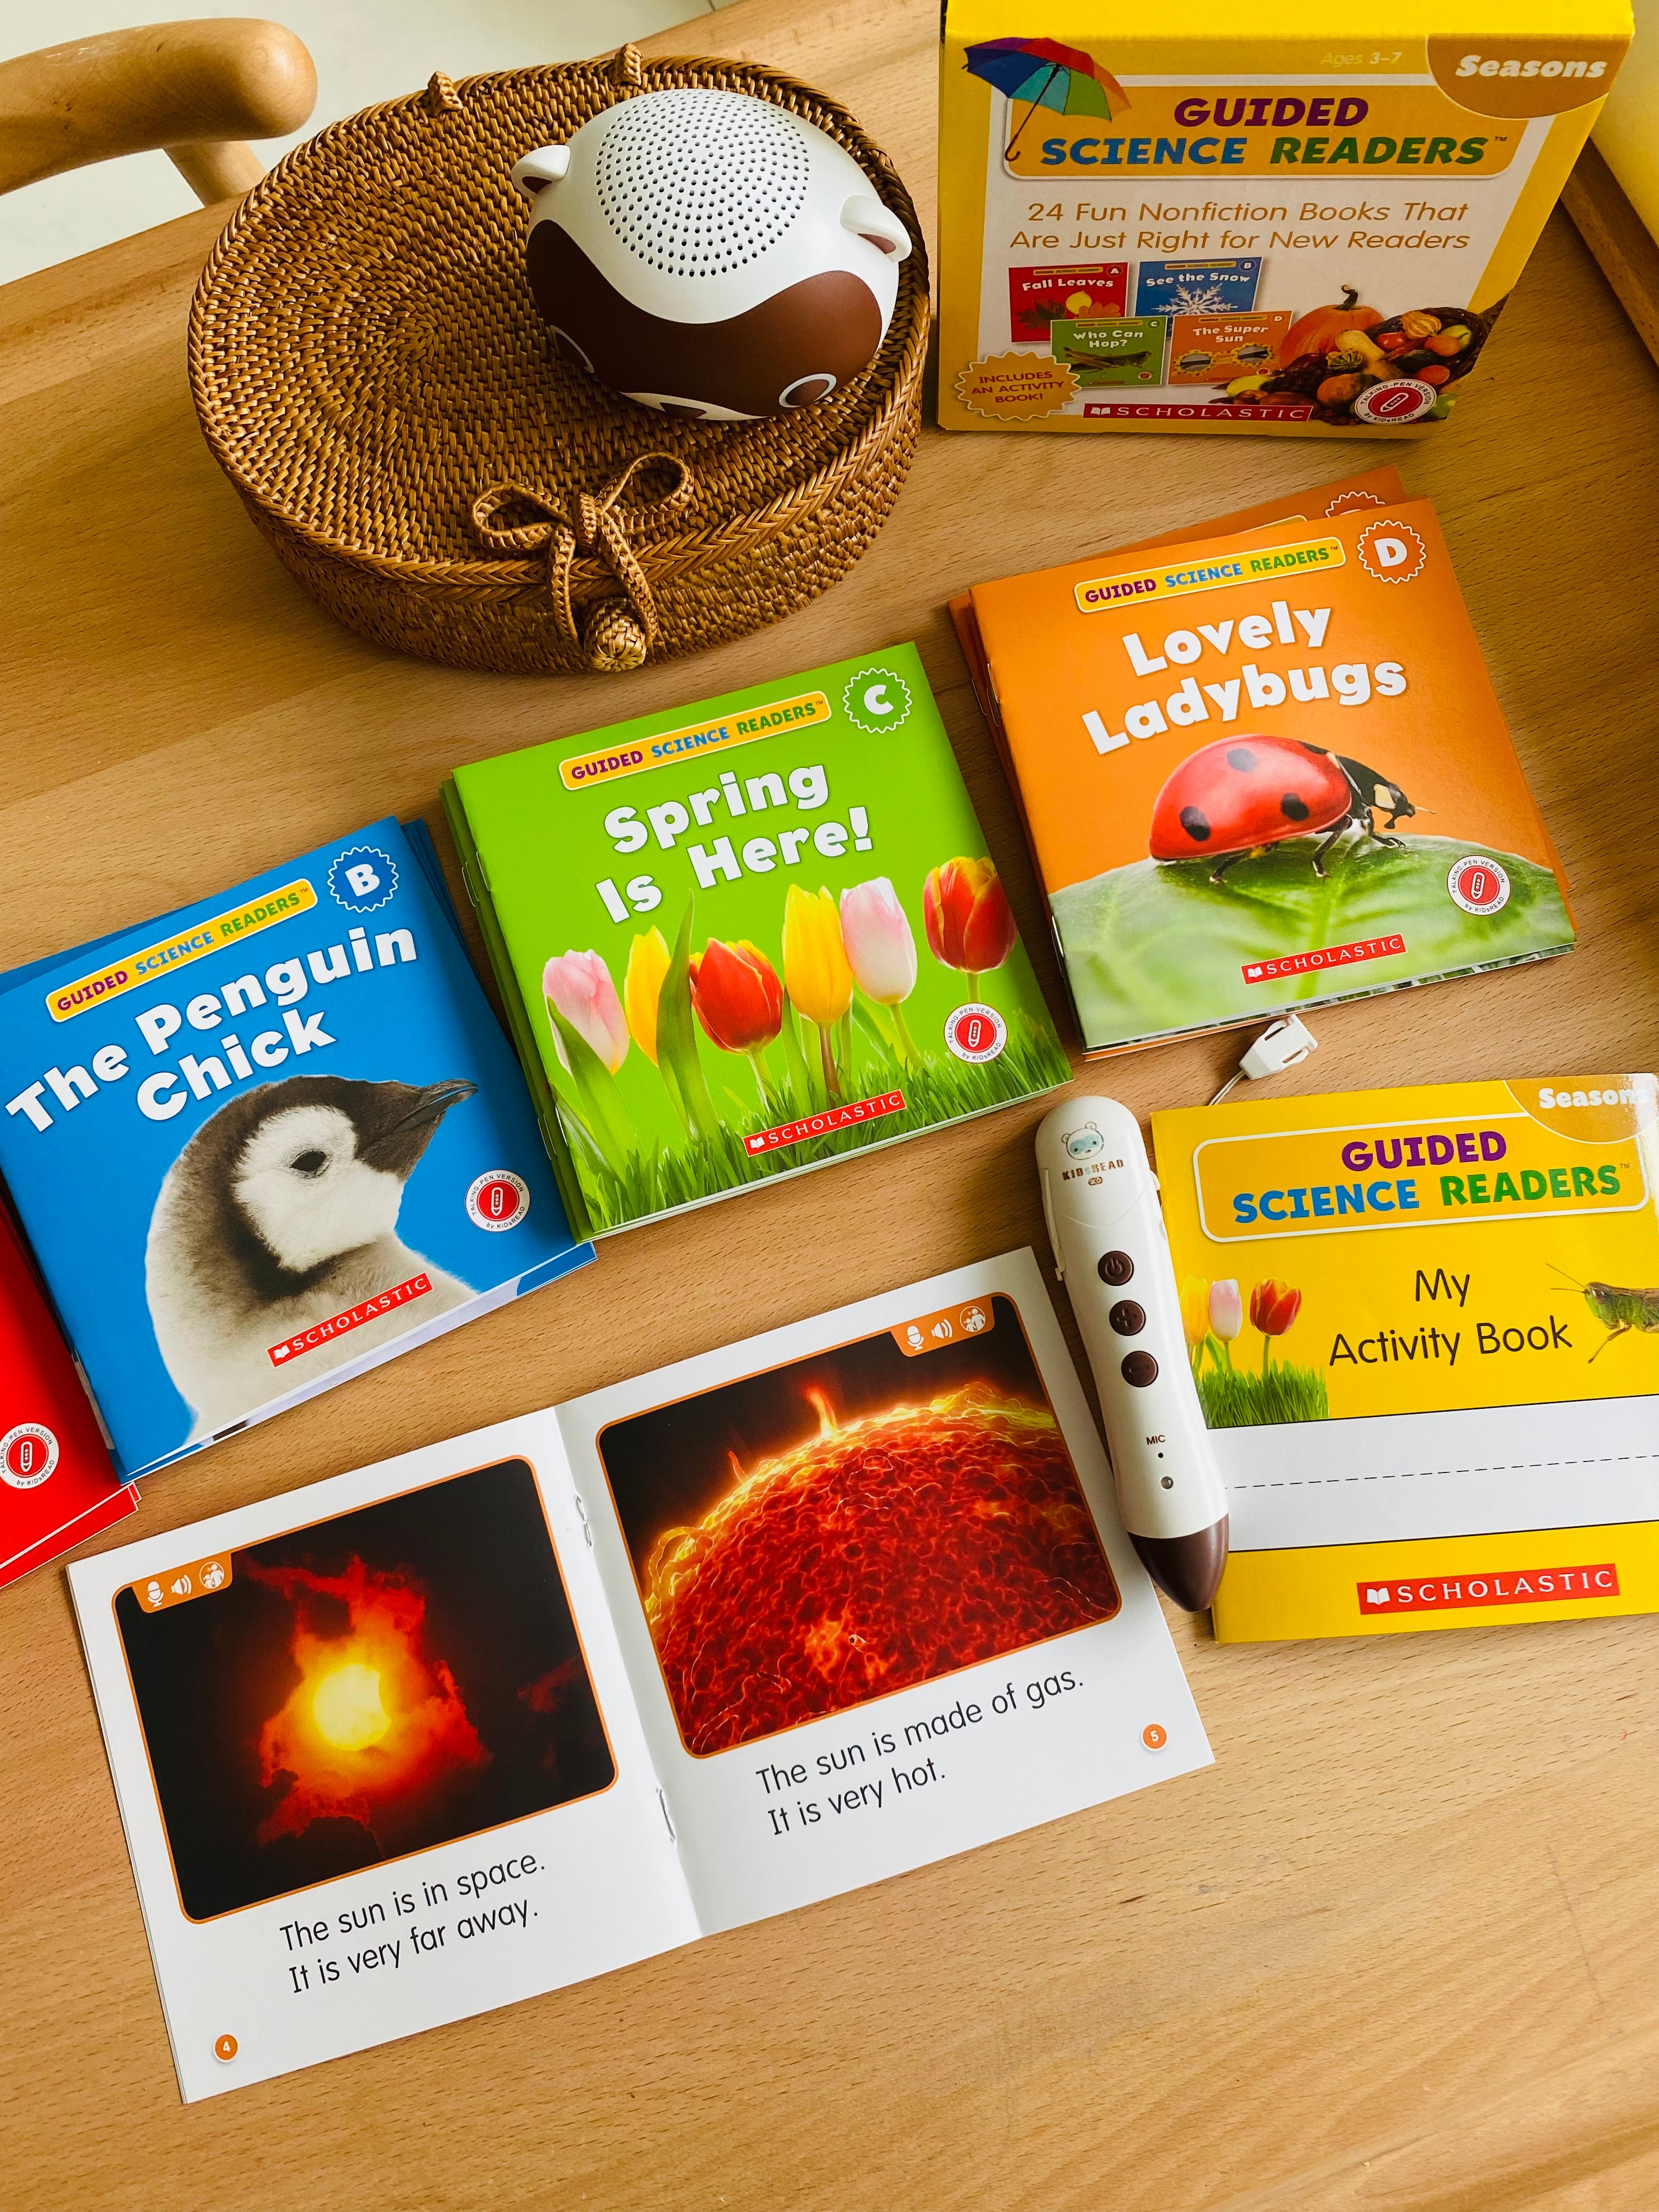 Guided Science Readers 英文分階讀本- 4 Seasons 季節– Mr Little 